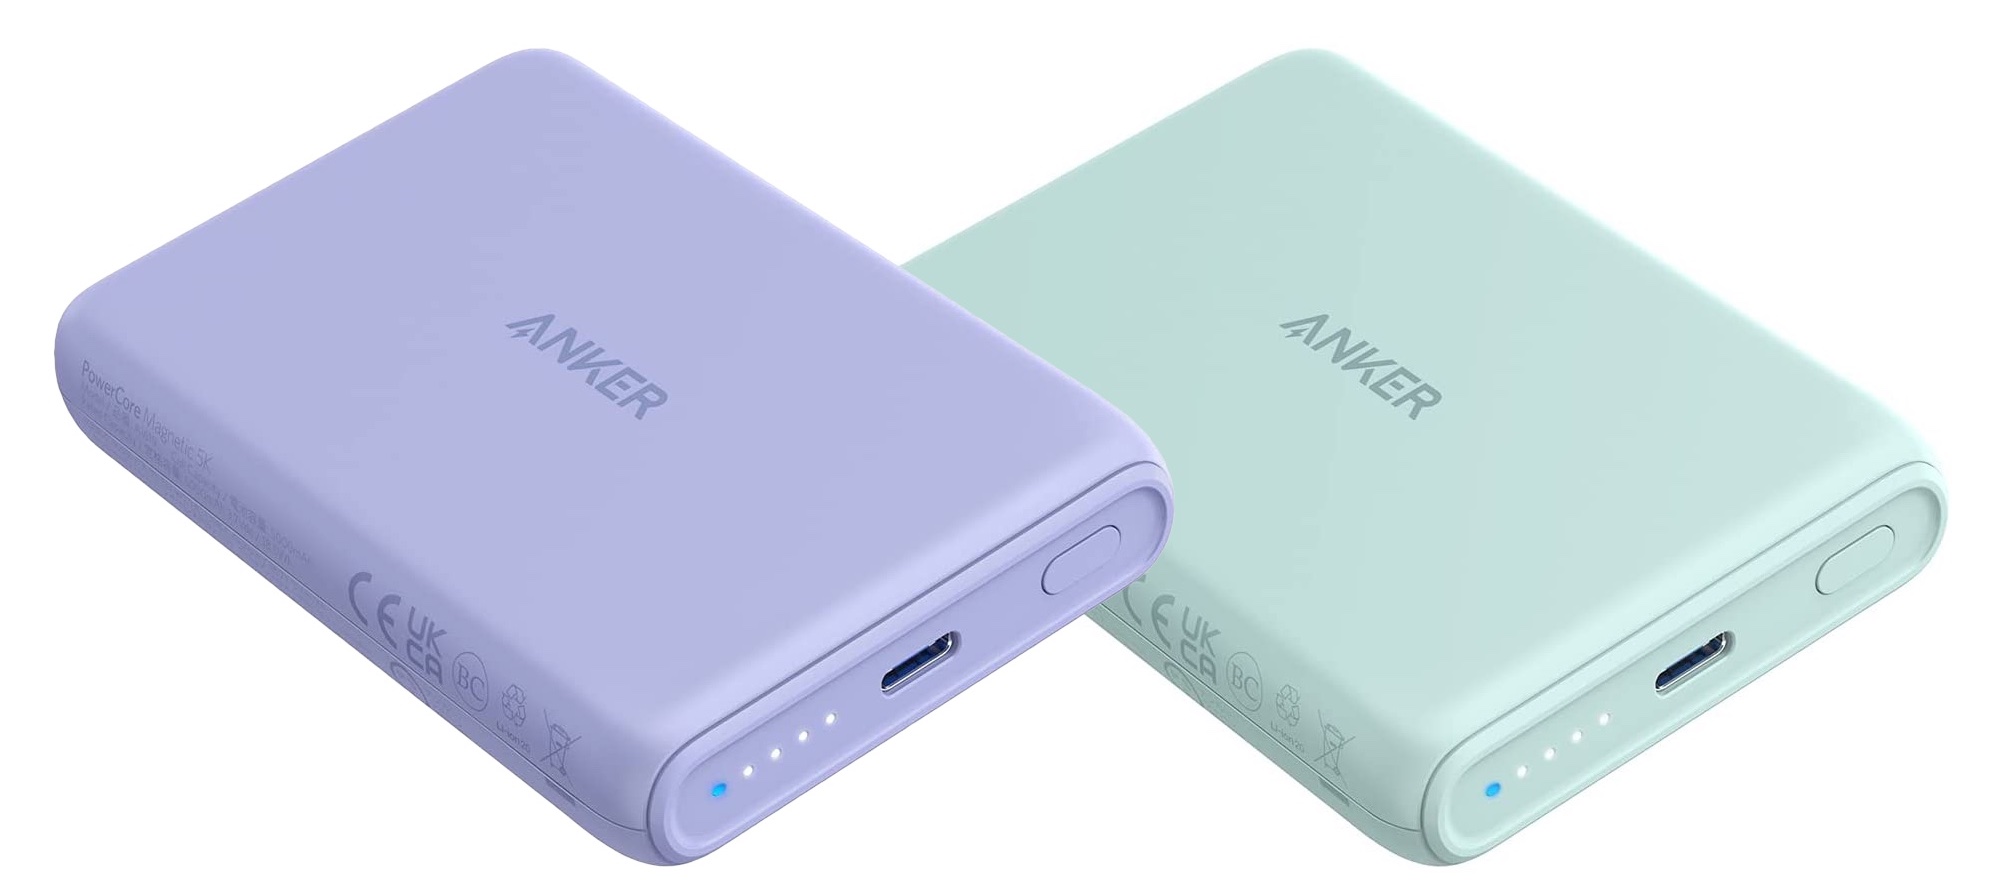 Anker MagSafe Power Bank now comes in four new colors 9to5Toys